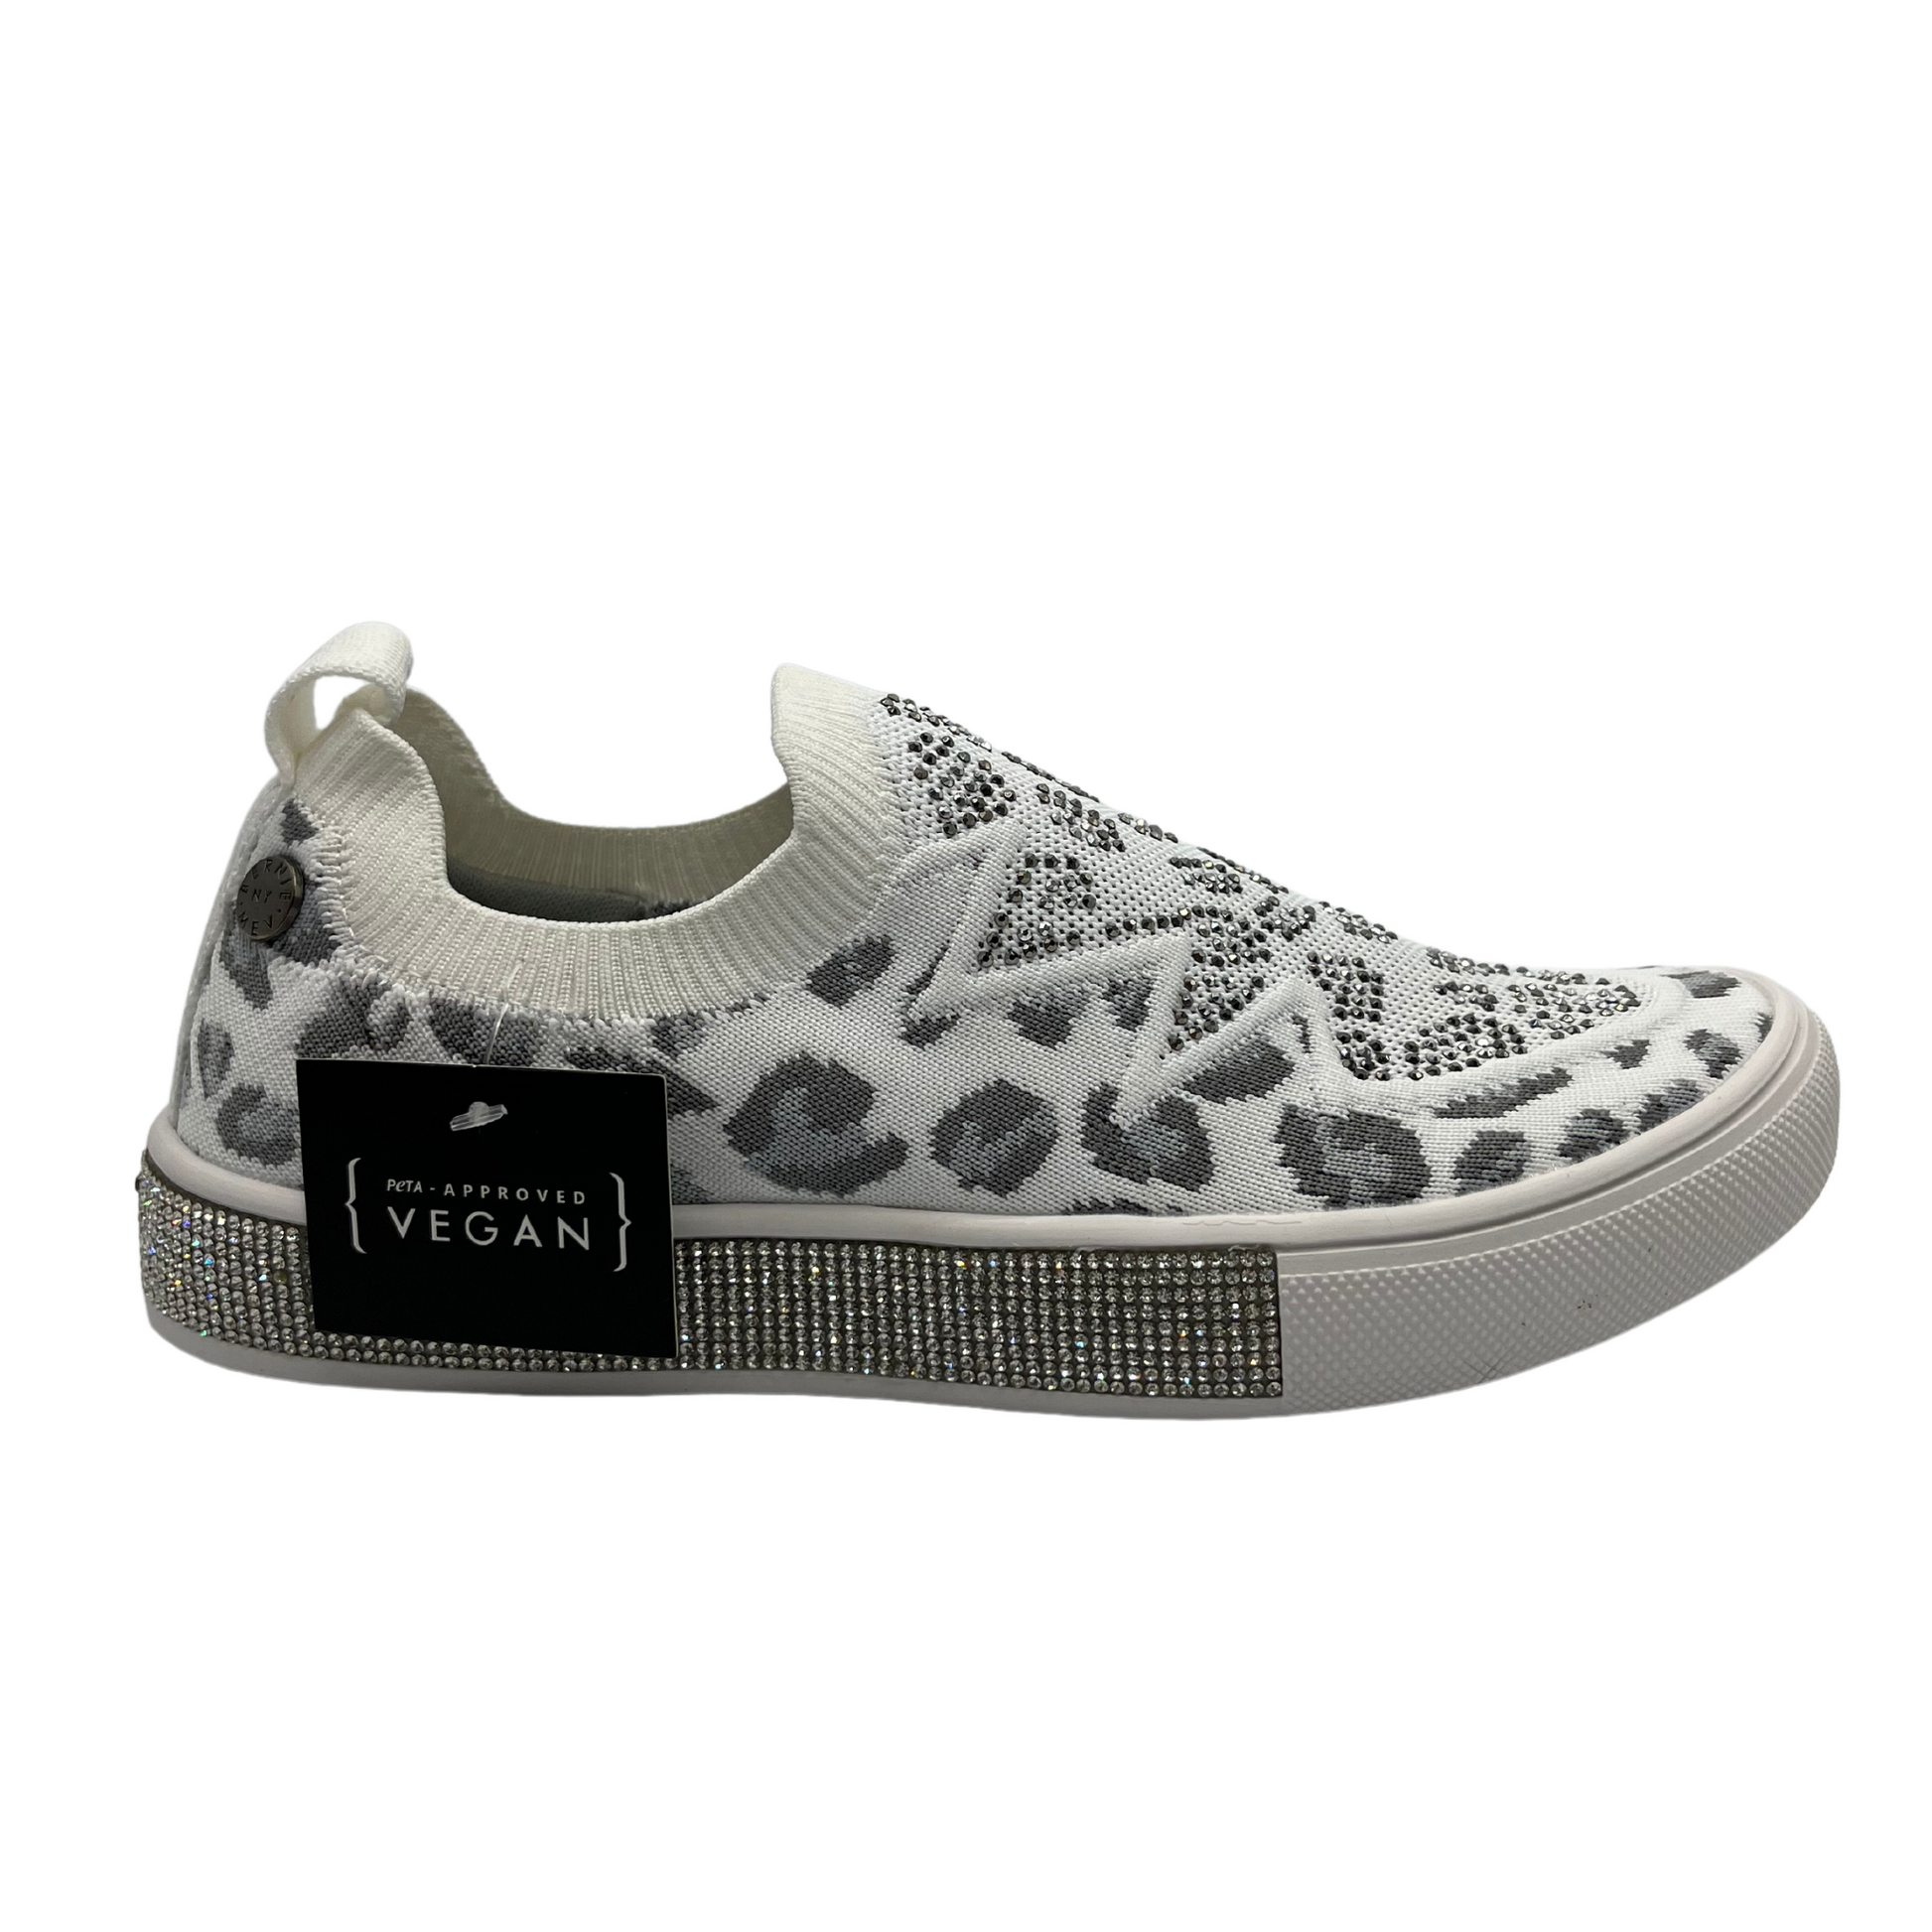 Right facing view of a slip on style sneaker in a fun leopard print with silver crystal accents. Shown in white